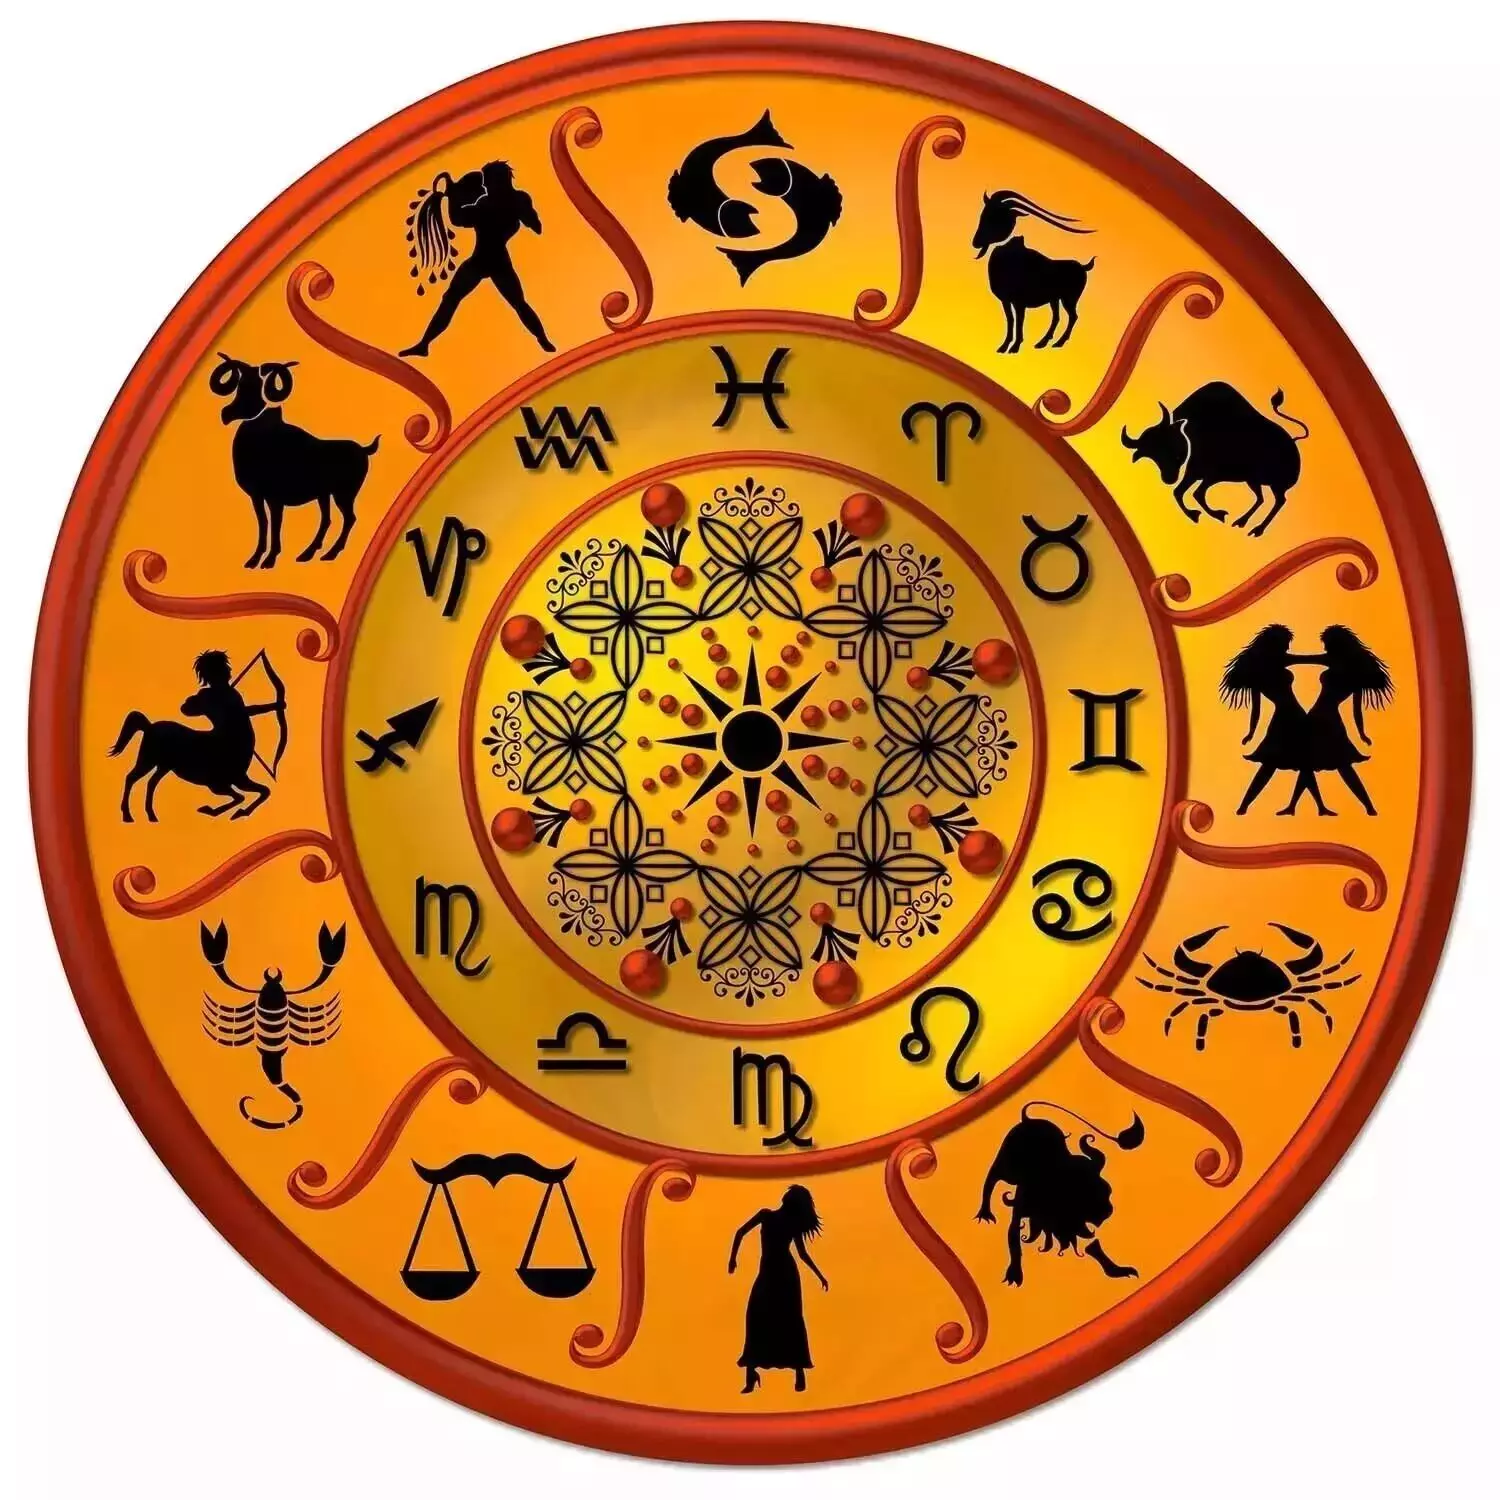 28 March  – Know your todays horoscope